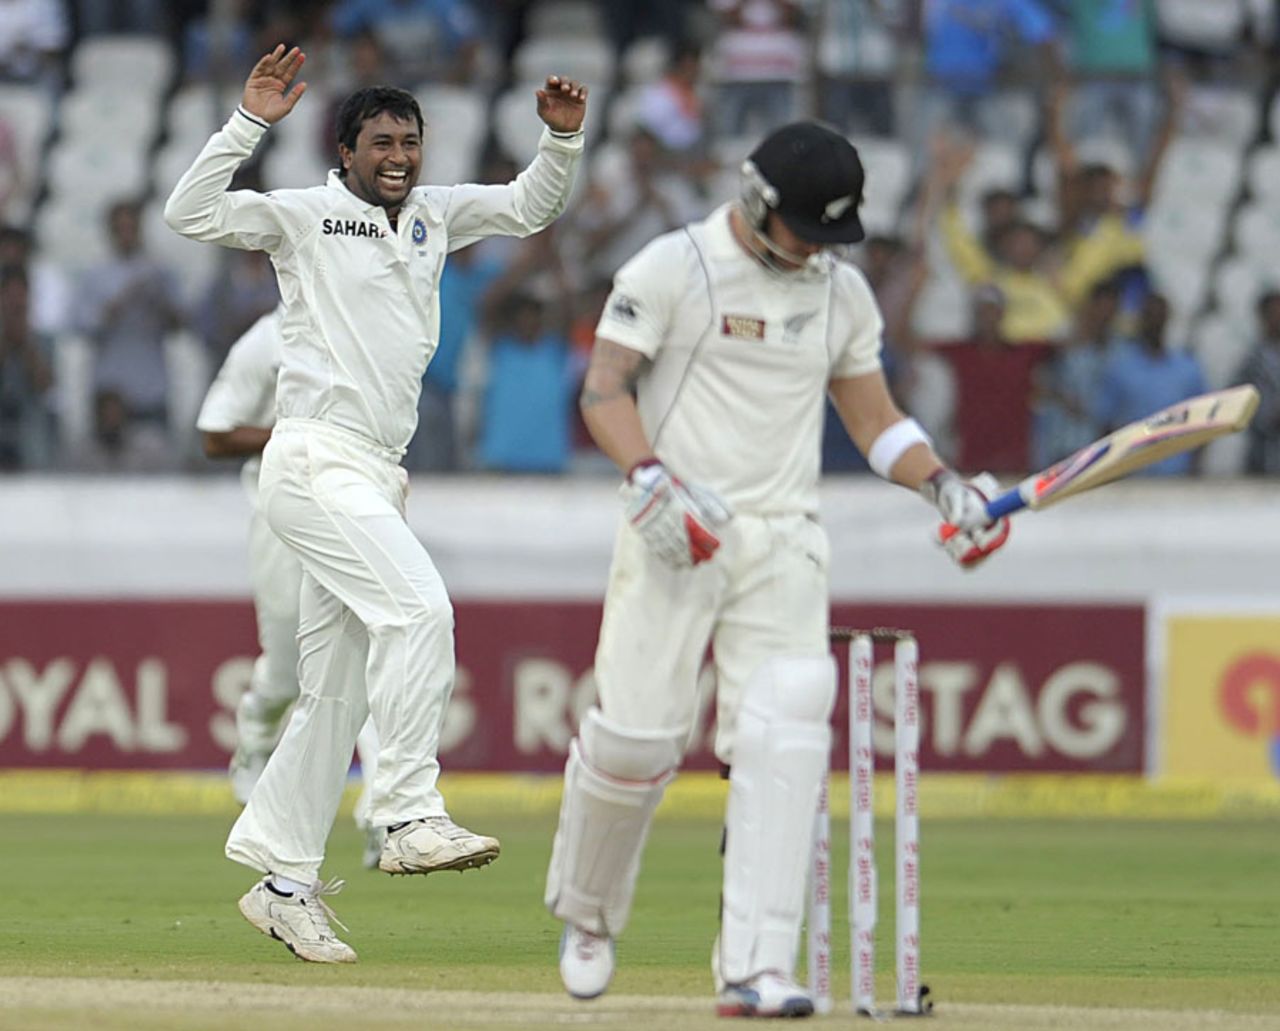 Pragyan Ojha reacts after dismissing Brendon McCullum, India v New Zealand, 1st Test, Hyderabad, 2nd day, August 24, 2012